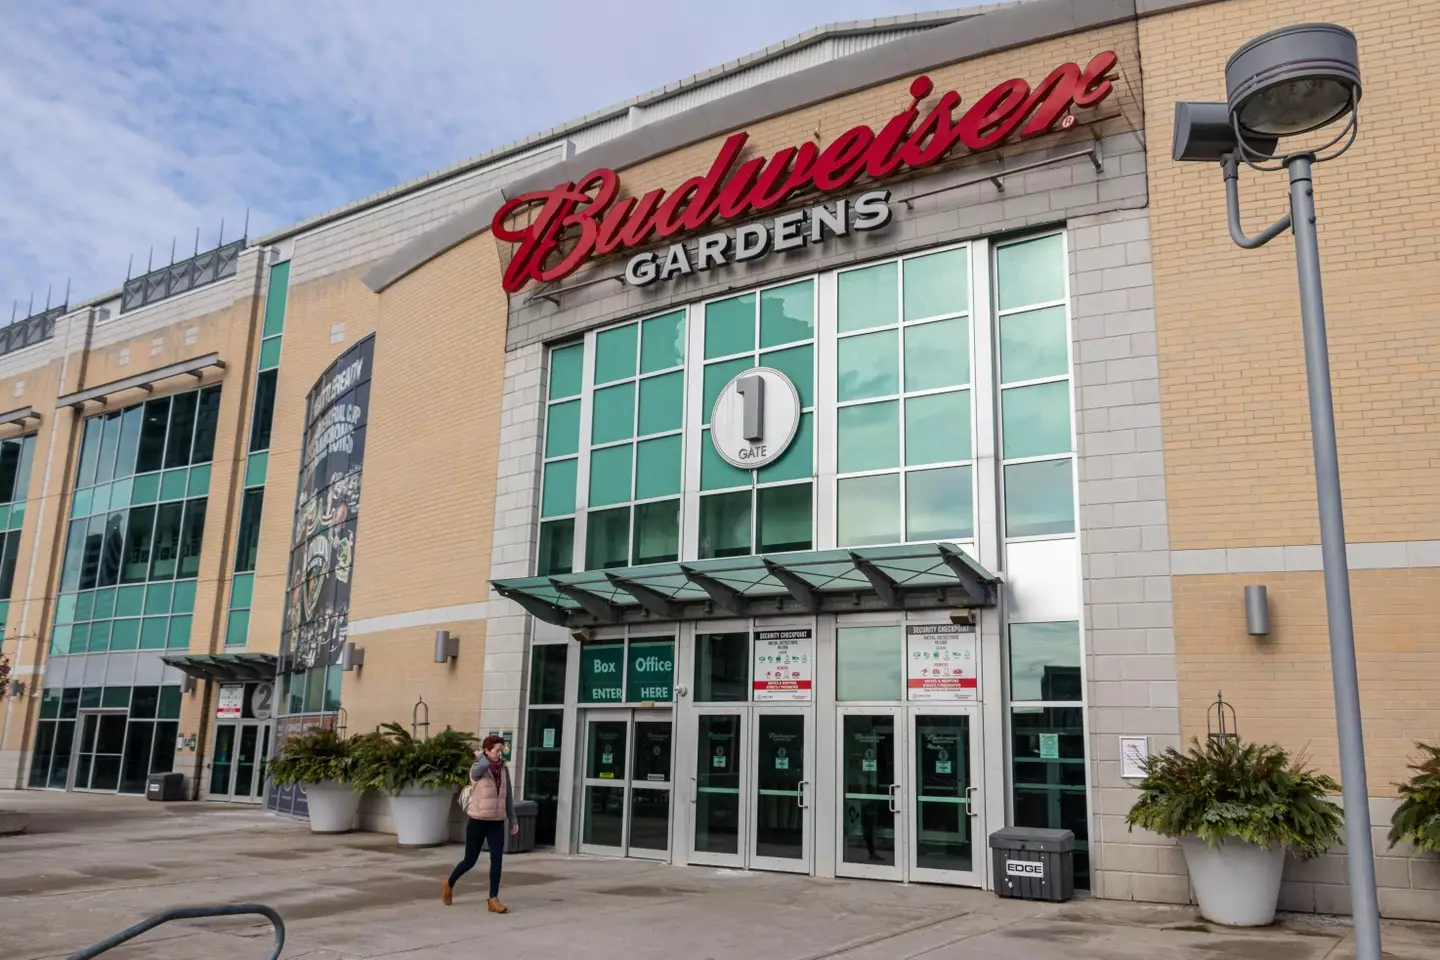 Daniella Leis claims Budweiser Gardens should be partly liable for an explosion she caused in 2019.